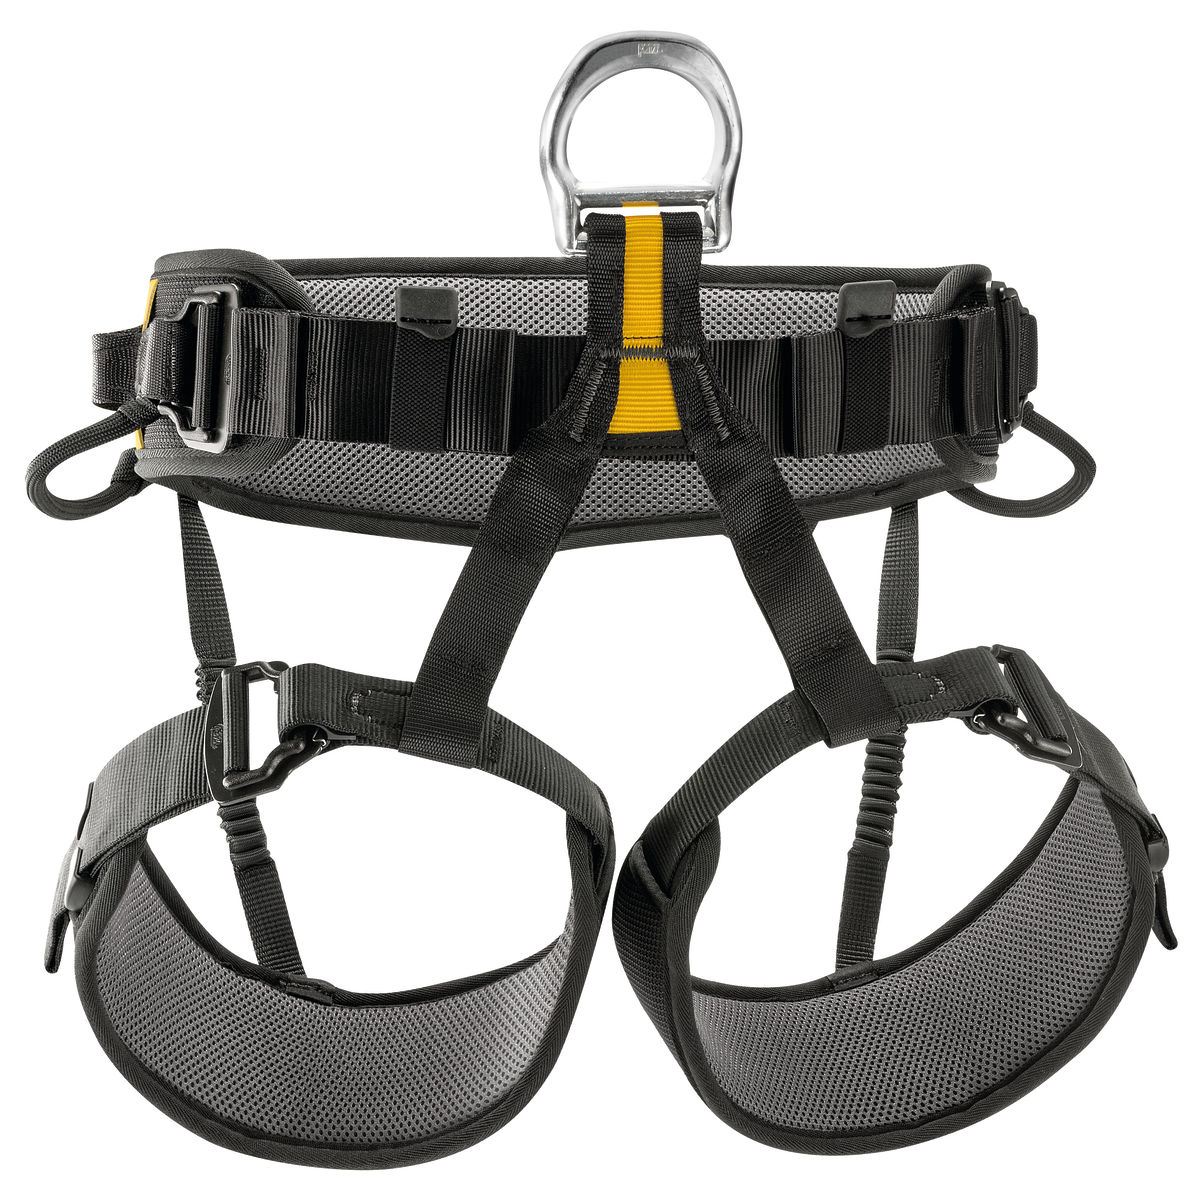 Skylotec Tower Pro Harness with Aluminum D-rings G-1080